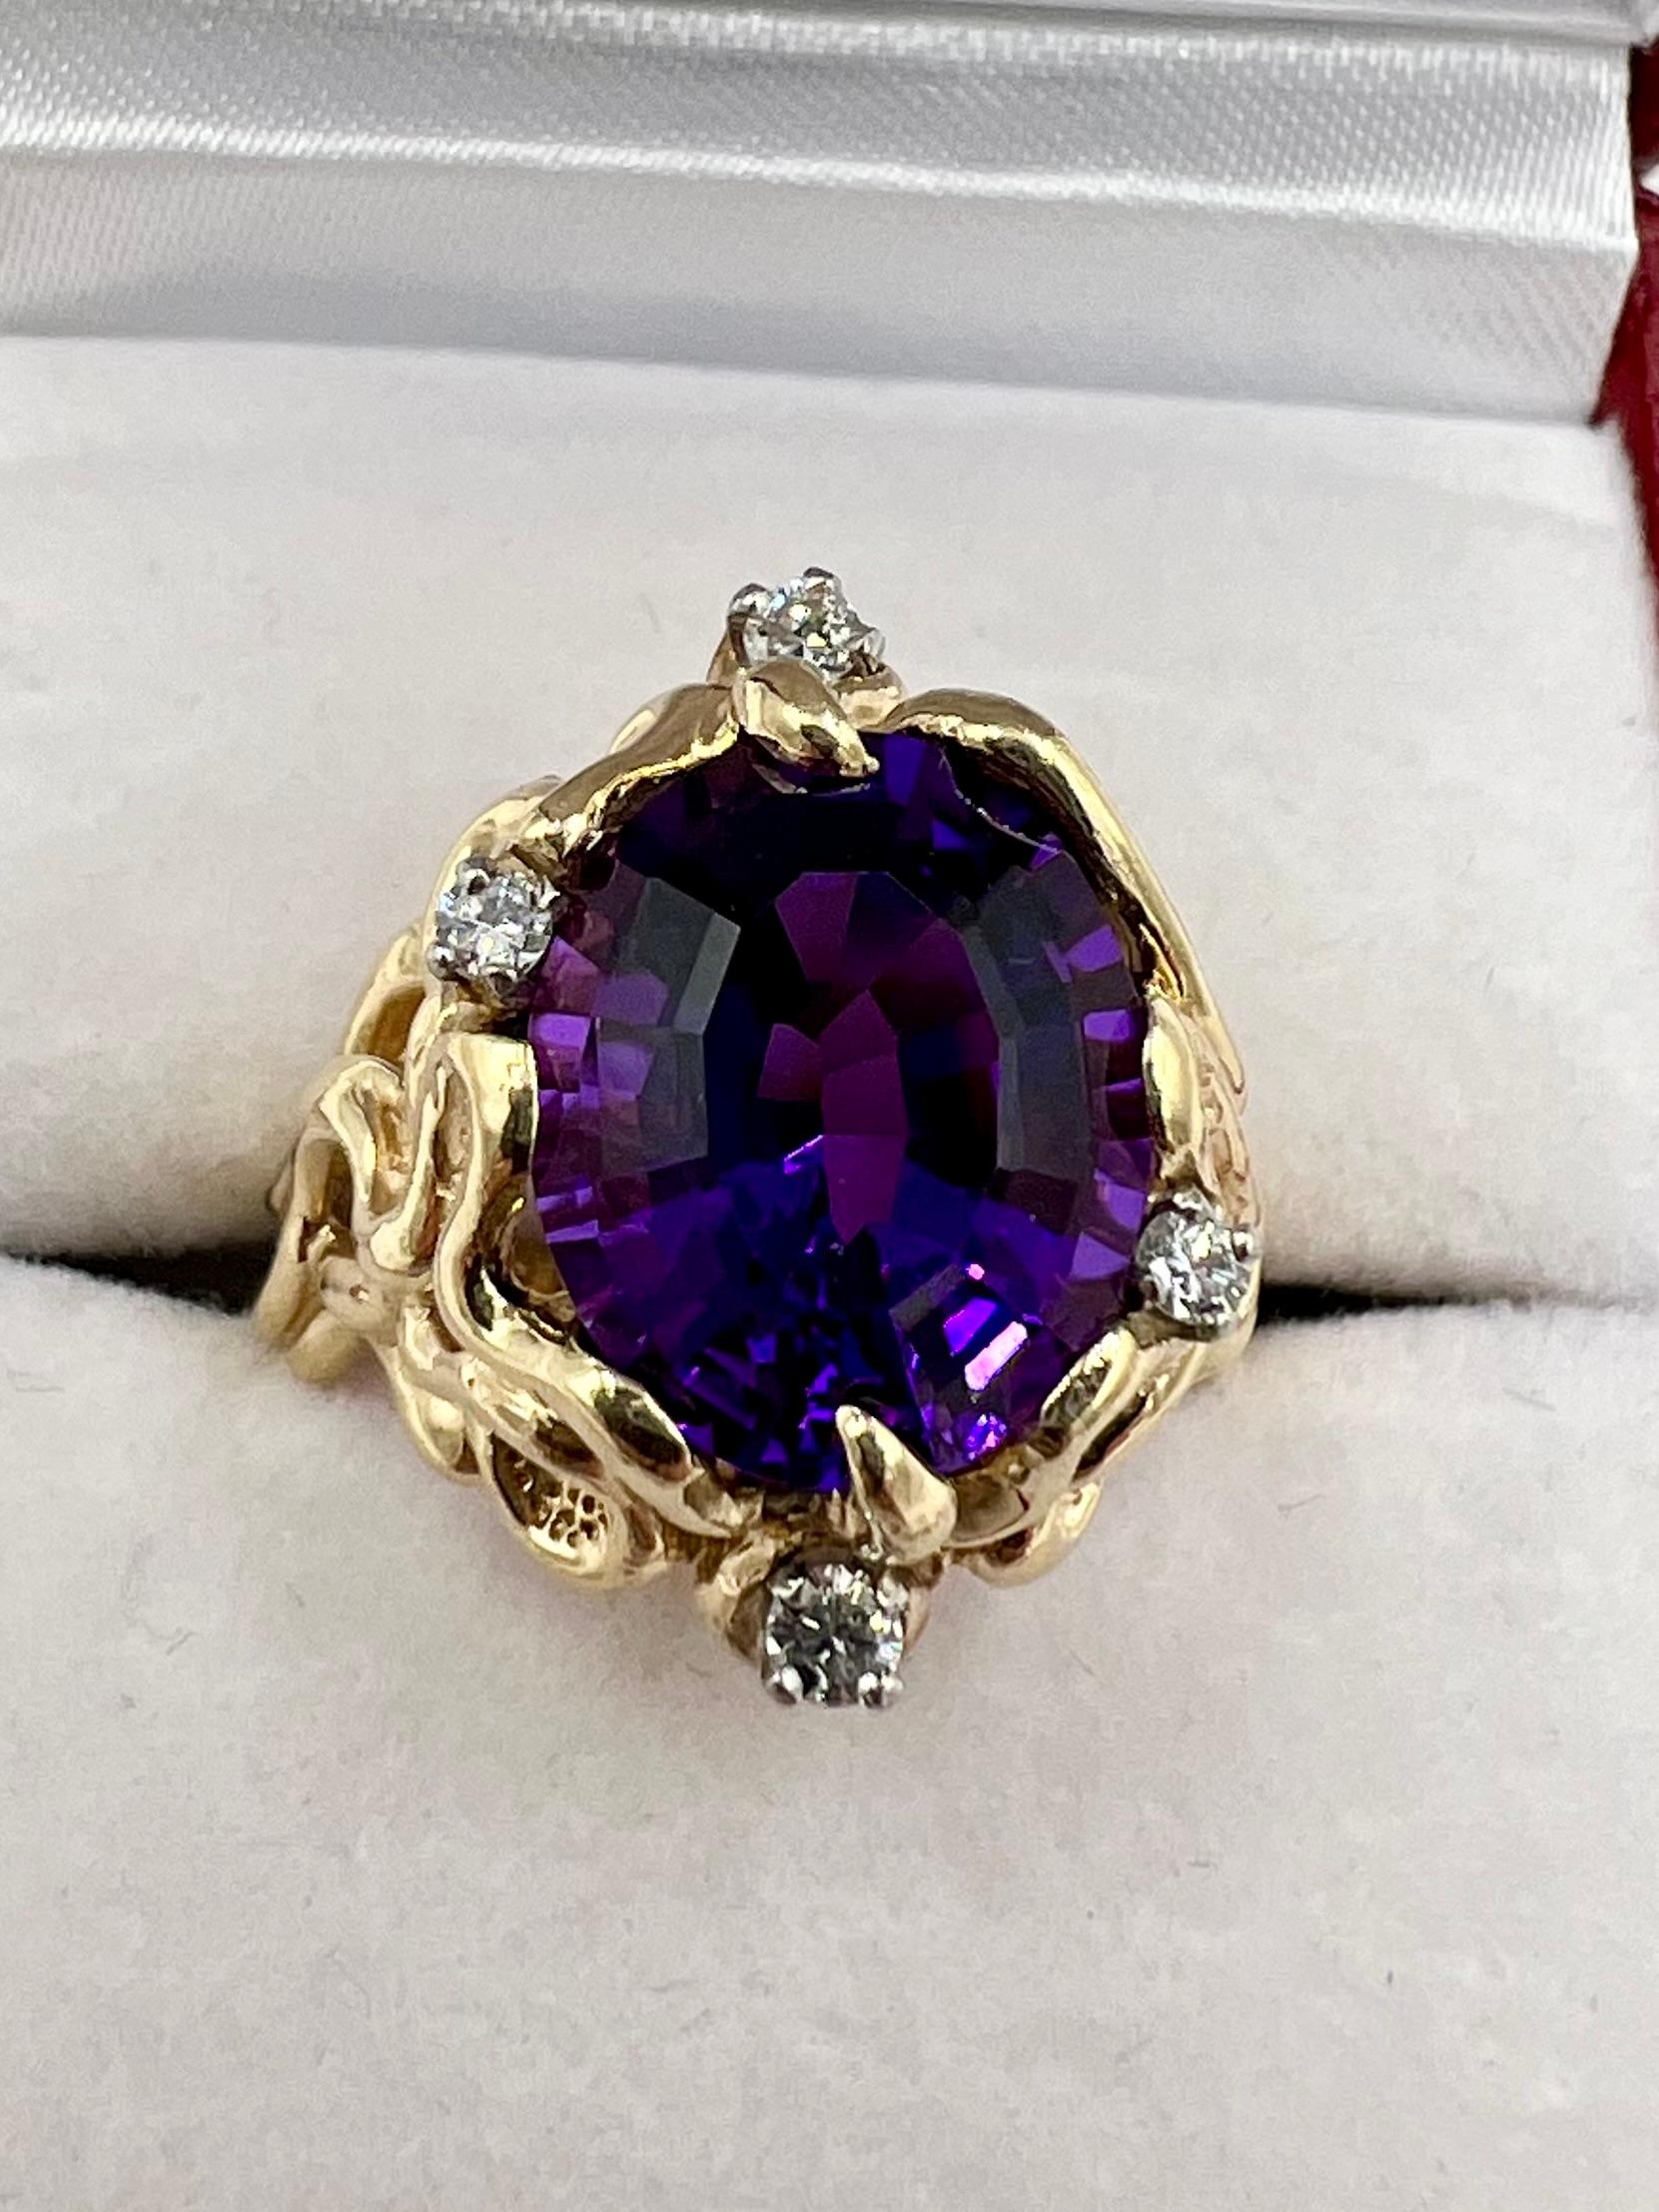 Vintage Amethyst diamond abstract yellow gold ring, circa 1970s.

   This vintage beauty showcases a very rich deep purple and vibrant oval Amethyst, accented by four round brilliant diamonds.  And don't overlook the beauty of this abstract designed